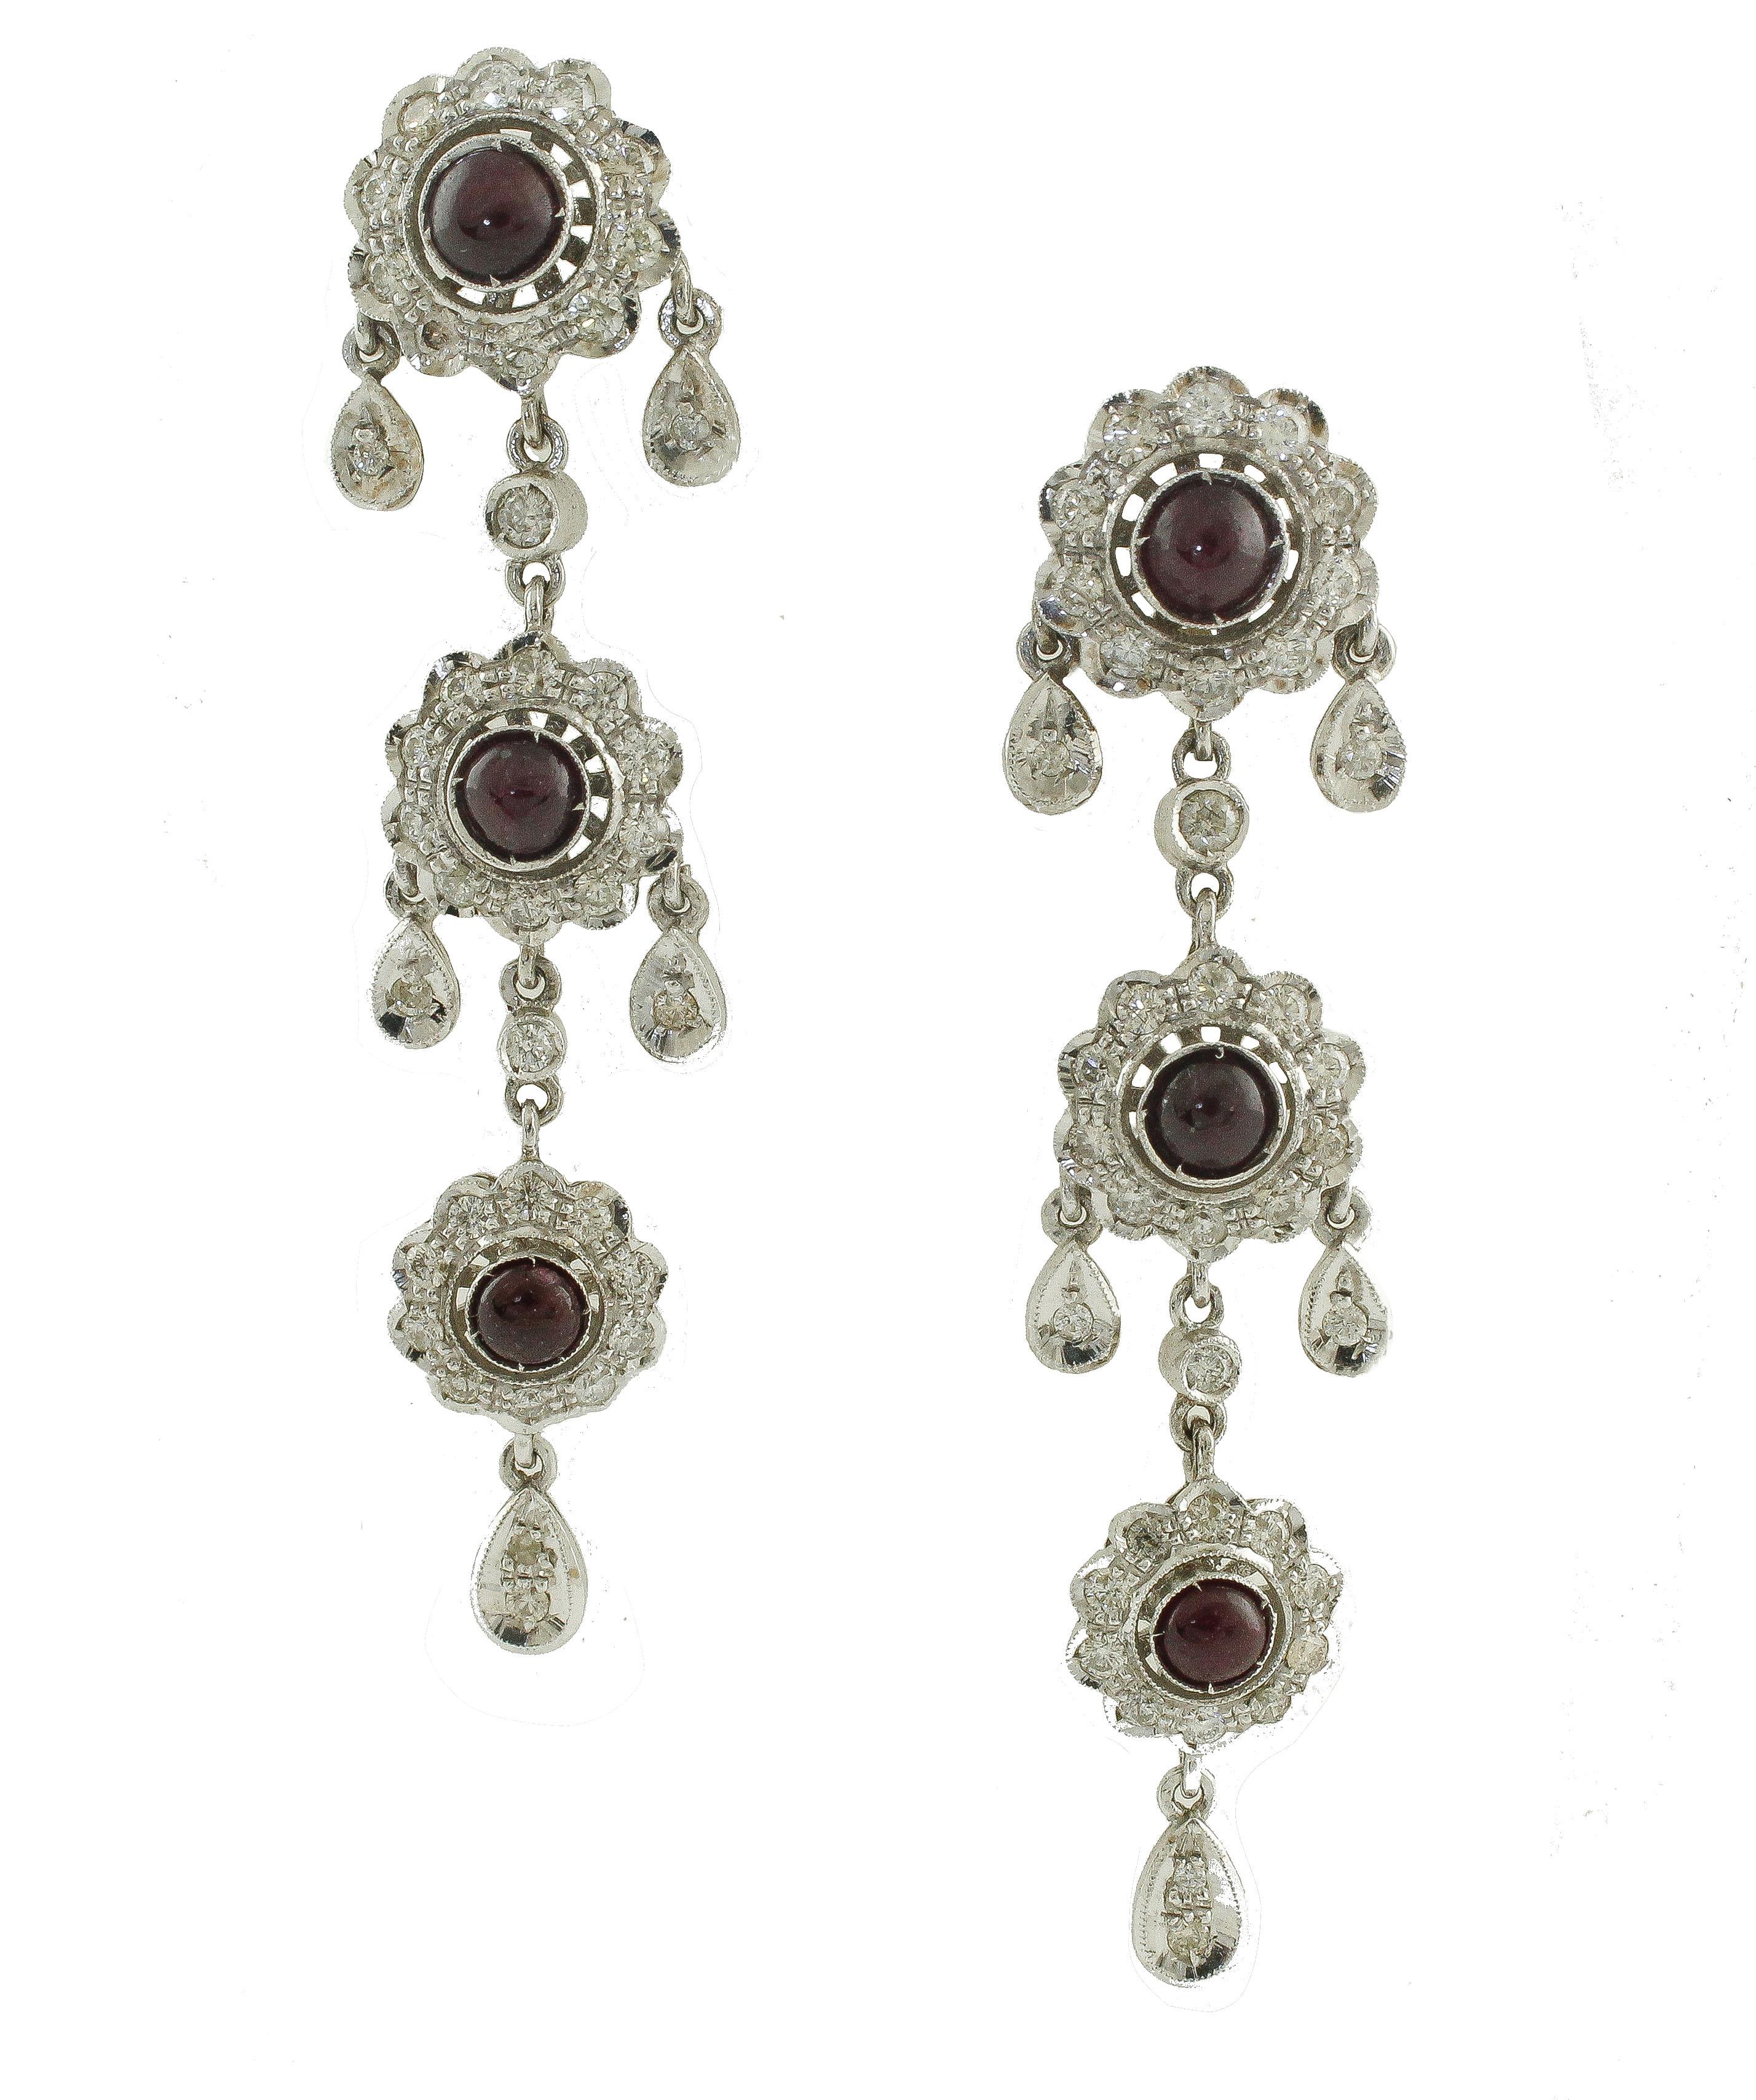 Particular chandelier earrings in 14Kt white gold composed of three flower covered in diamonds with a ruby in the center.

diamonds(2.47Kt)
ruby(3.78Kt)
tot weight 15gr
Rf. 536379

We hereby inform our customers that in the case of return they will